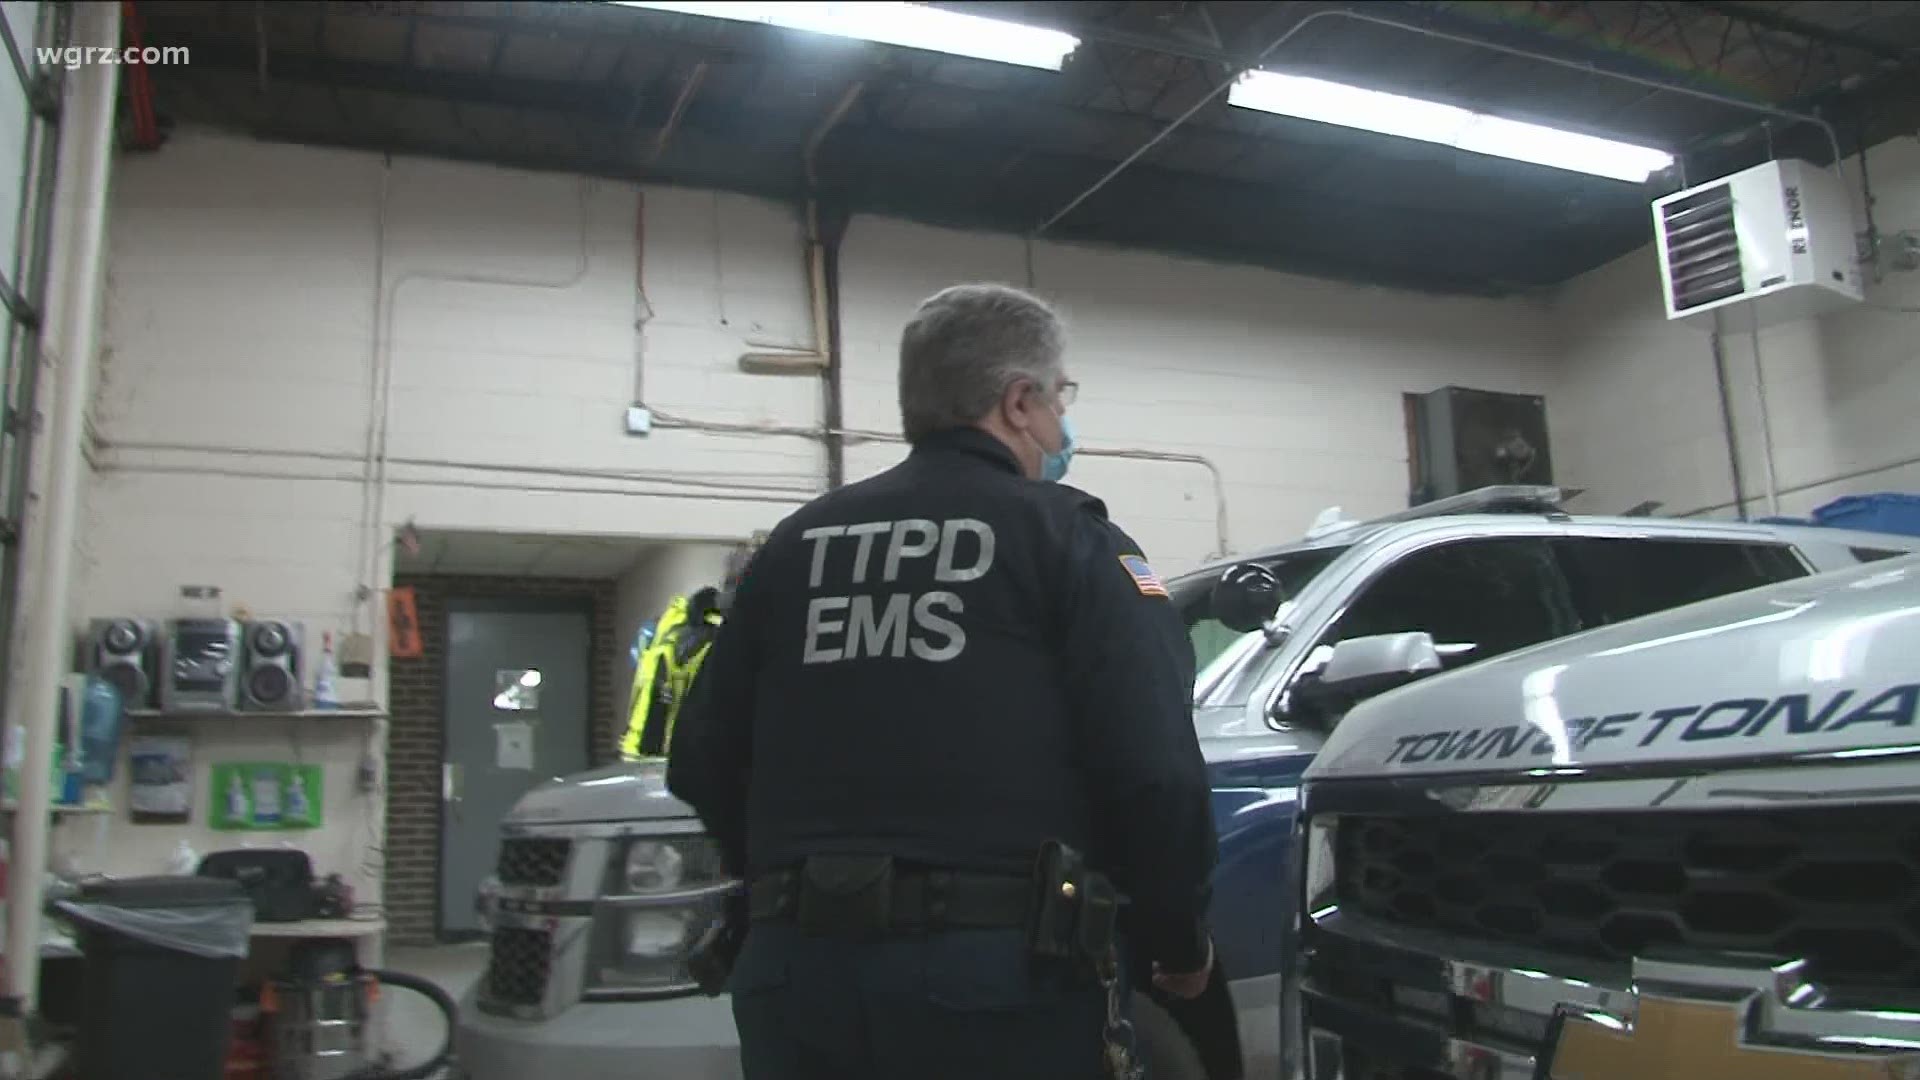 Town of Tonawanda was one of the first in the state to have a paramedic unit.